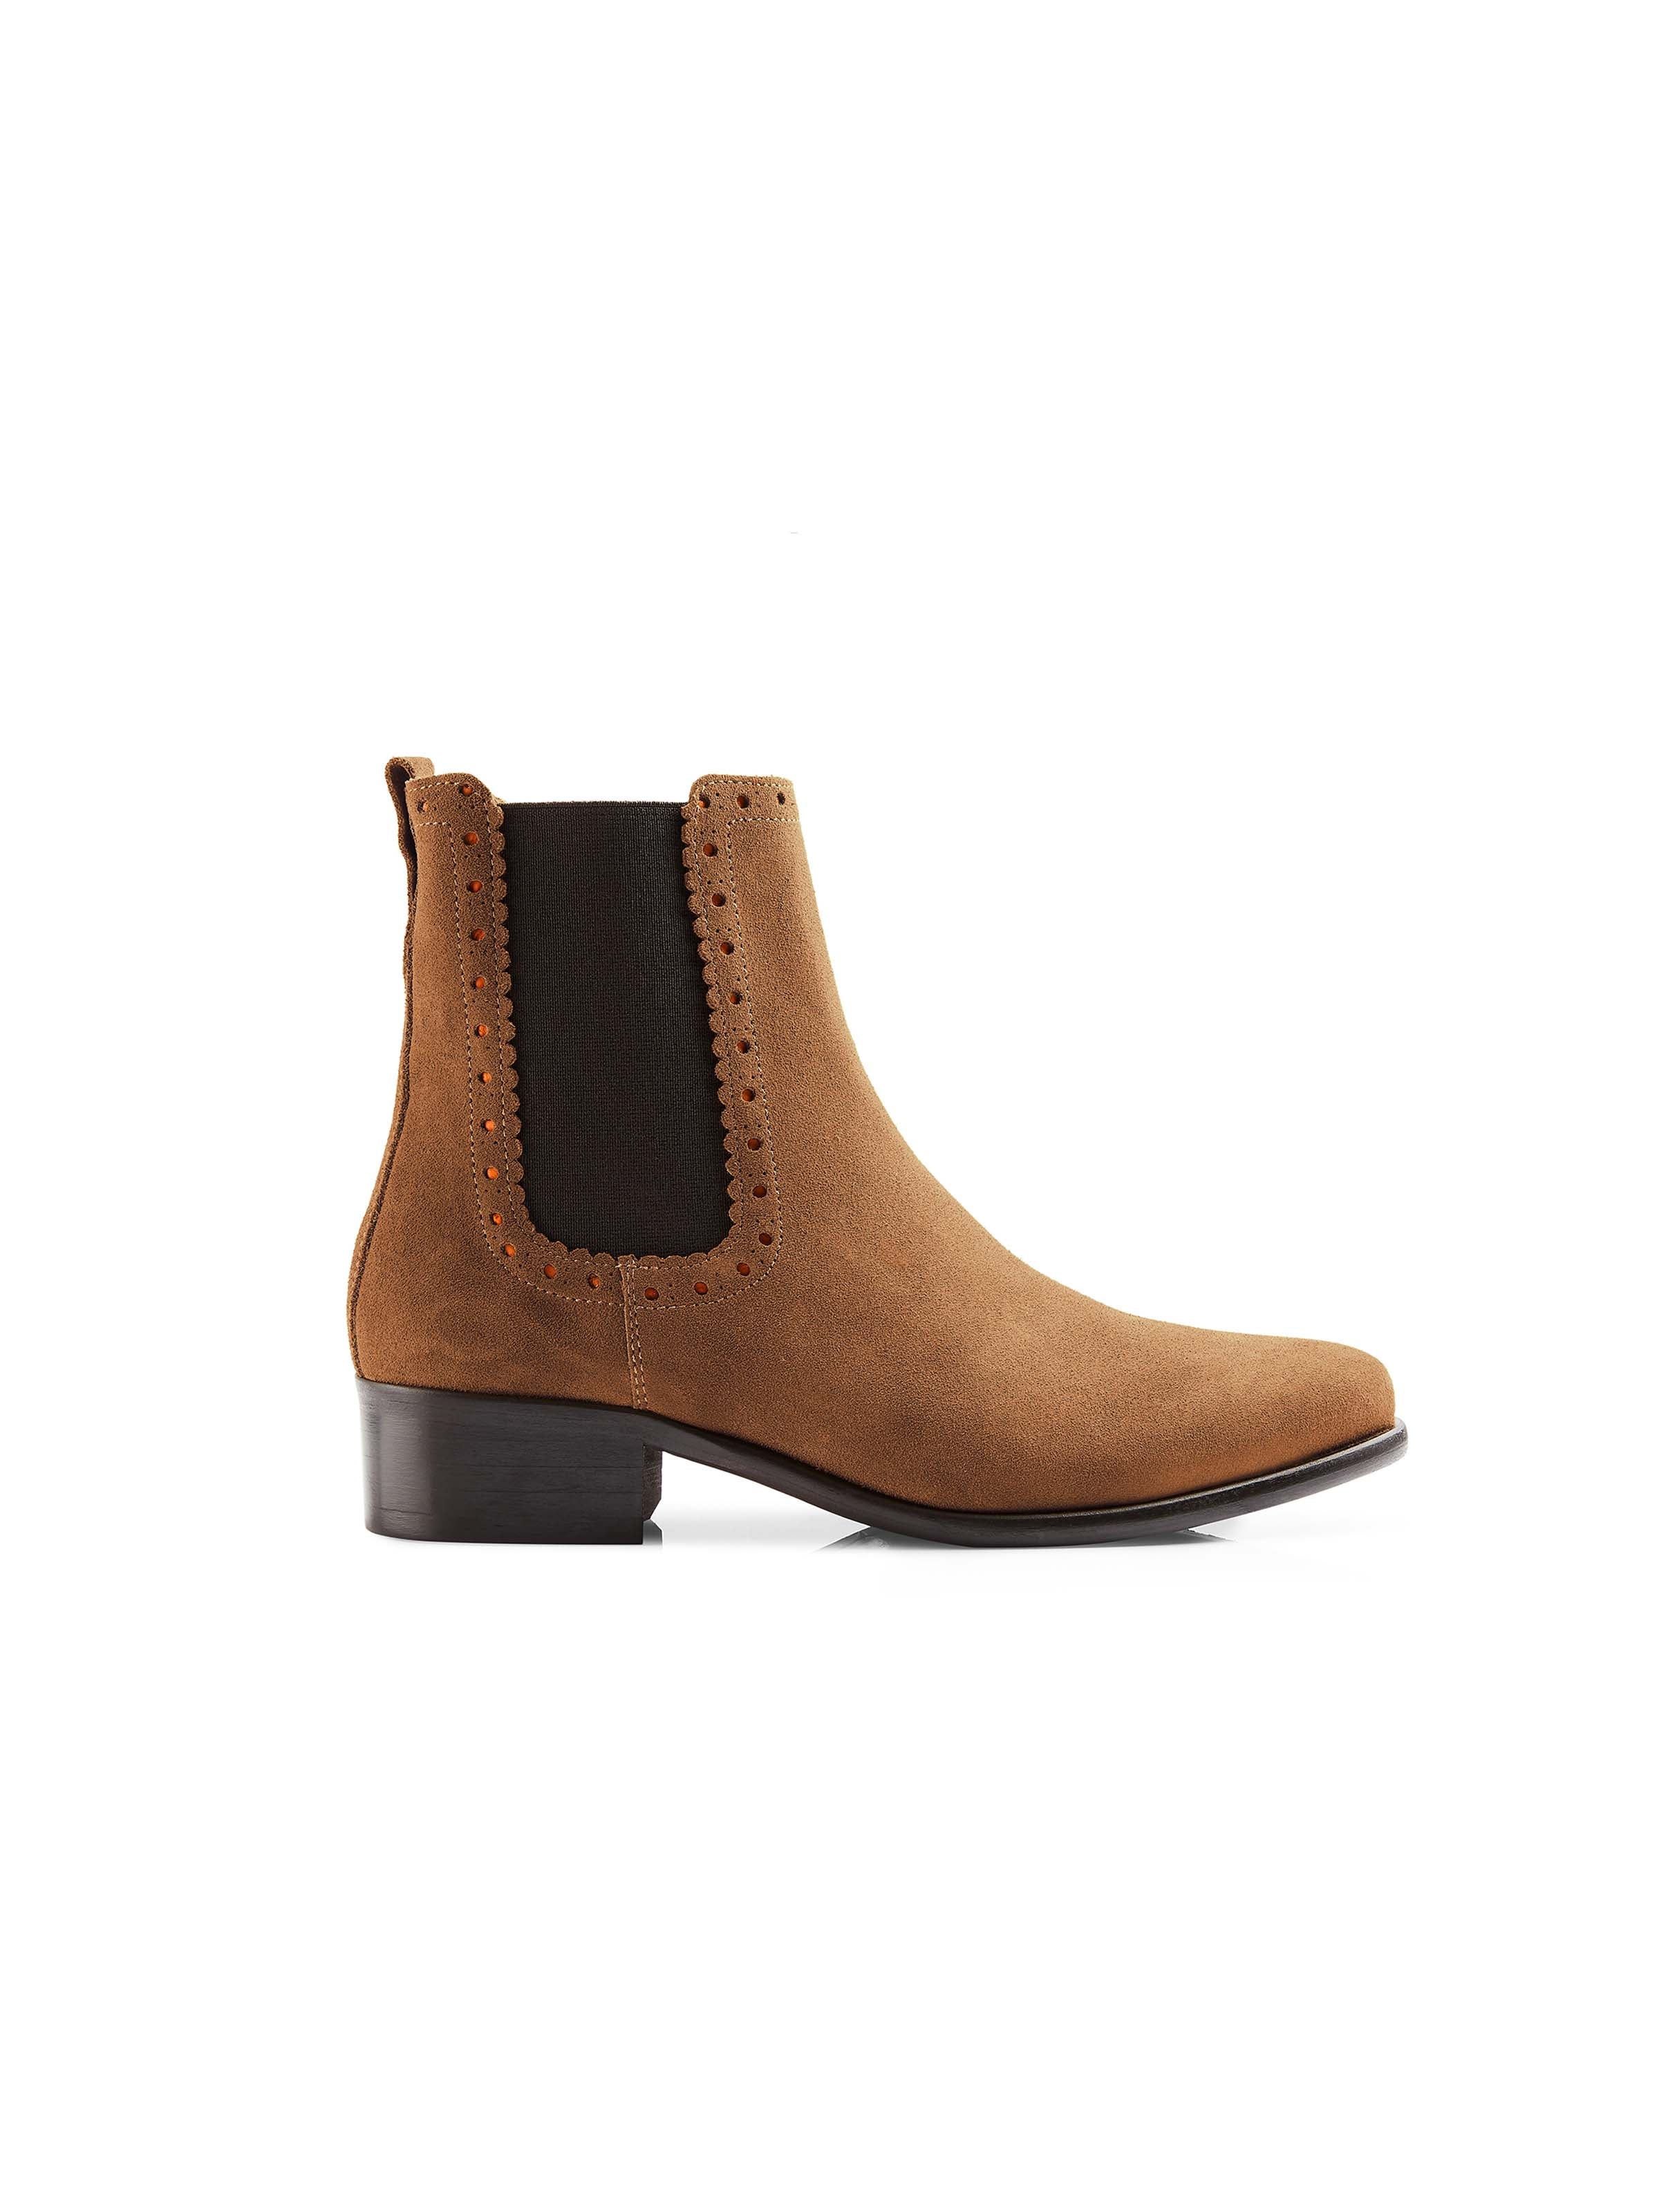 The Brogued Chelsea Boot - Tan Suede